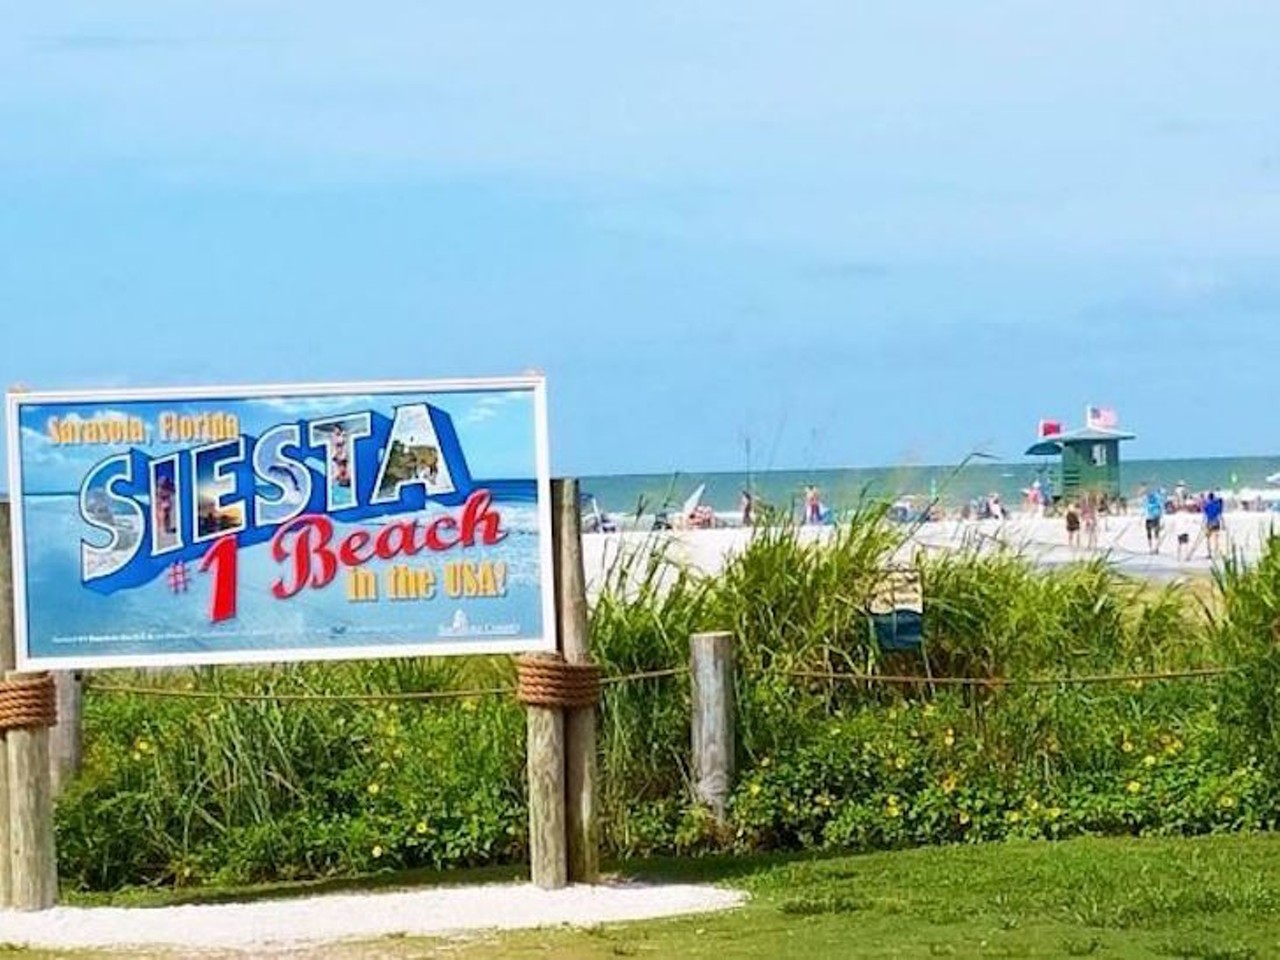 Siesta Key
Driving distance from Orlando: 2 hours 30 minutes  
Siesta Key is no joke. Lie down on the quartz white sand that TripAdvisor called &#147;The Best Beach in the Nation&#148; in 2015 and 2017 and watch the turquoise waves lap at the shoreline.
Photo via divincemoore/Instagram